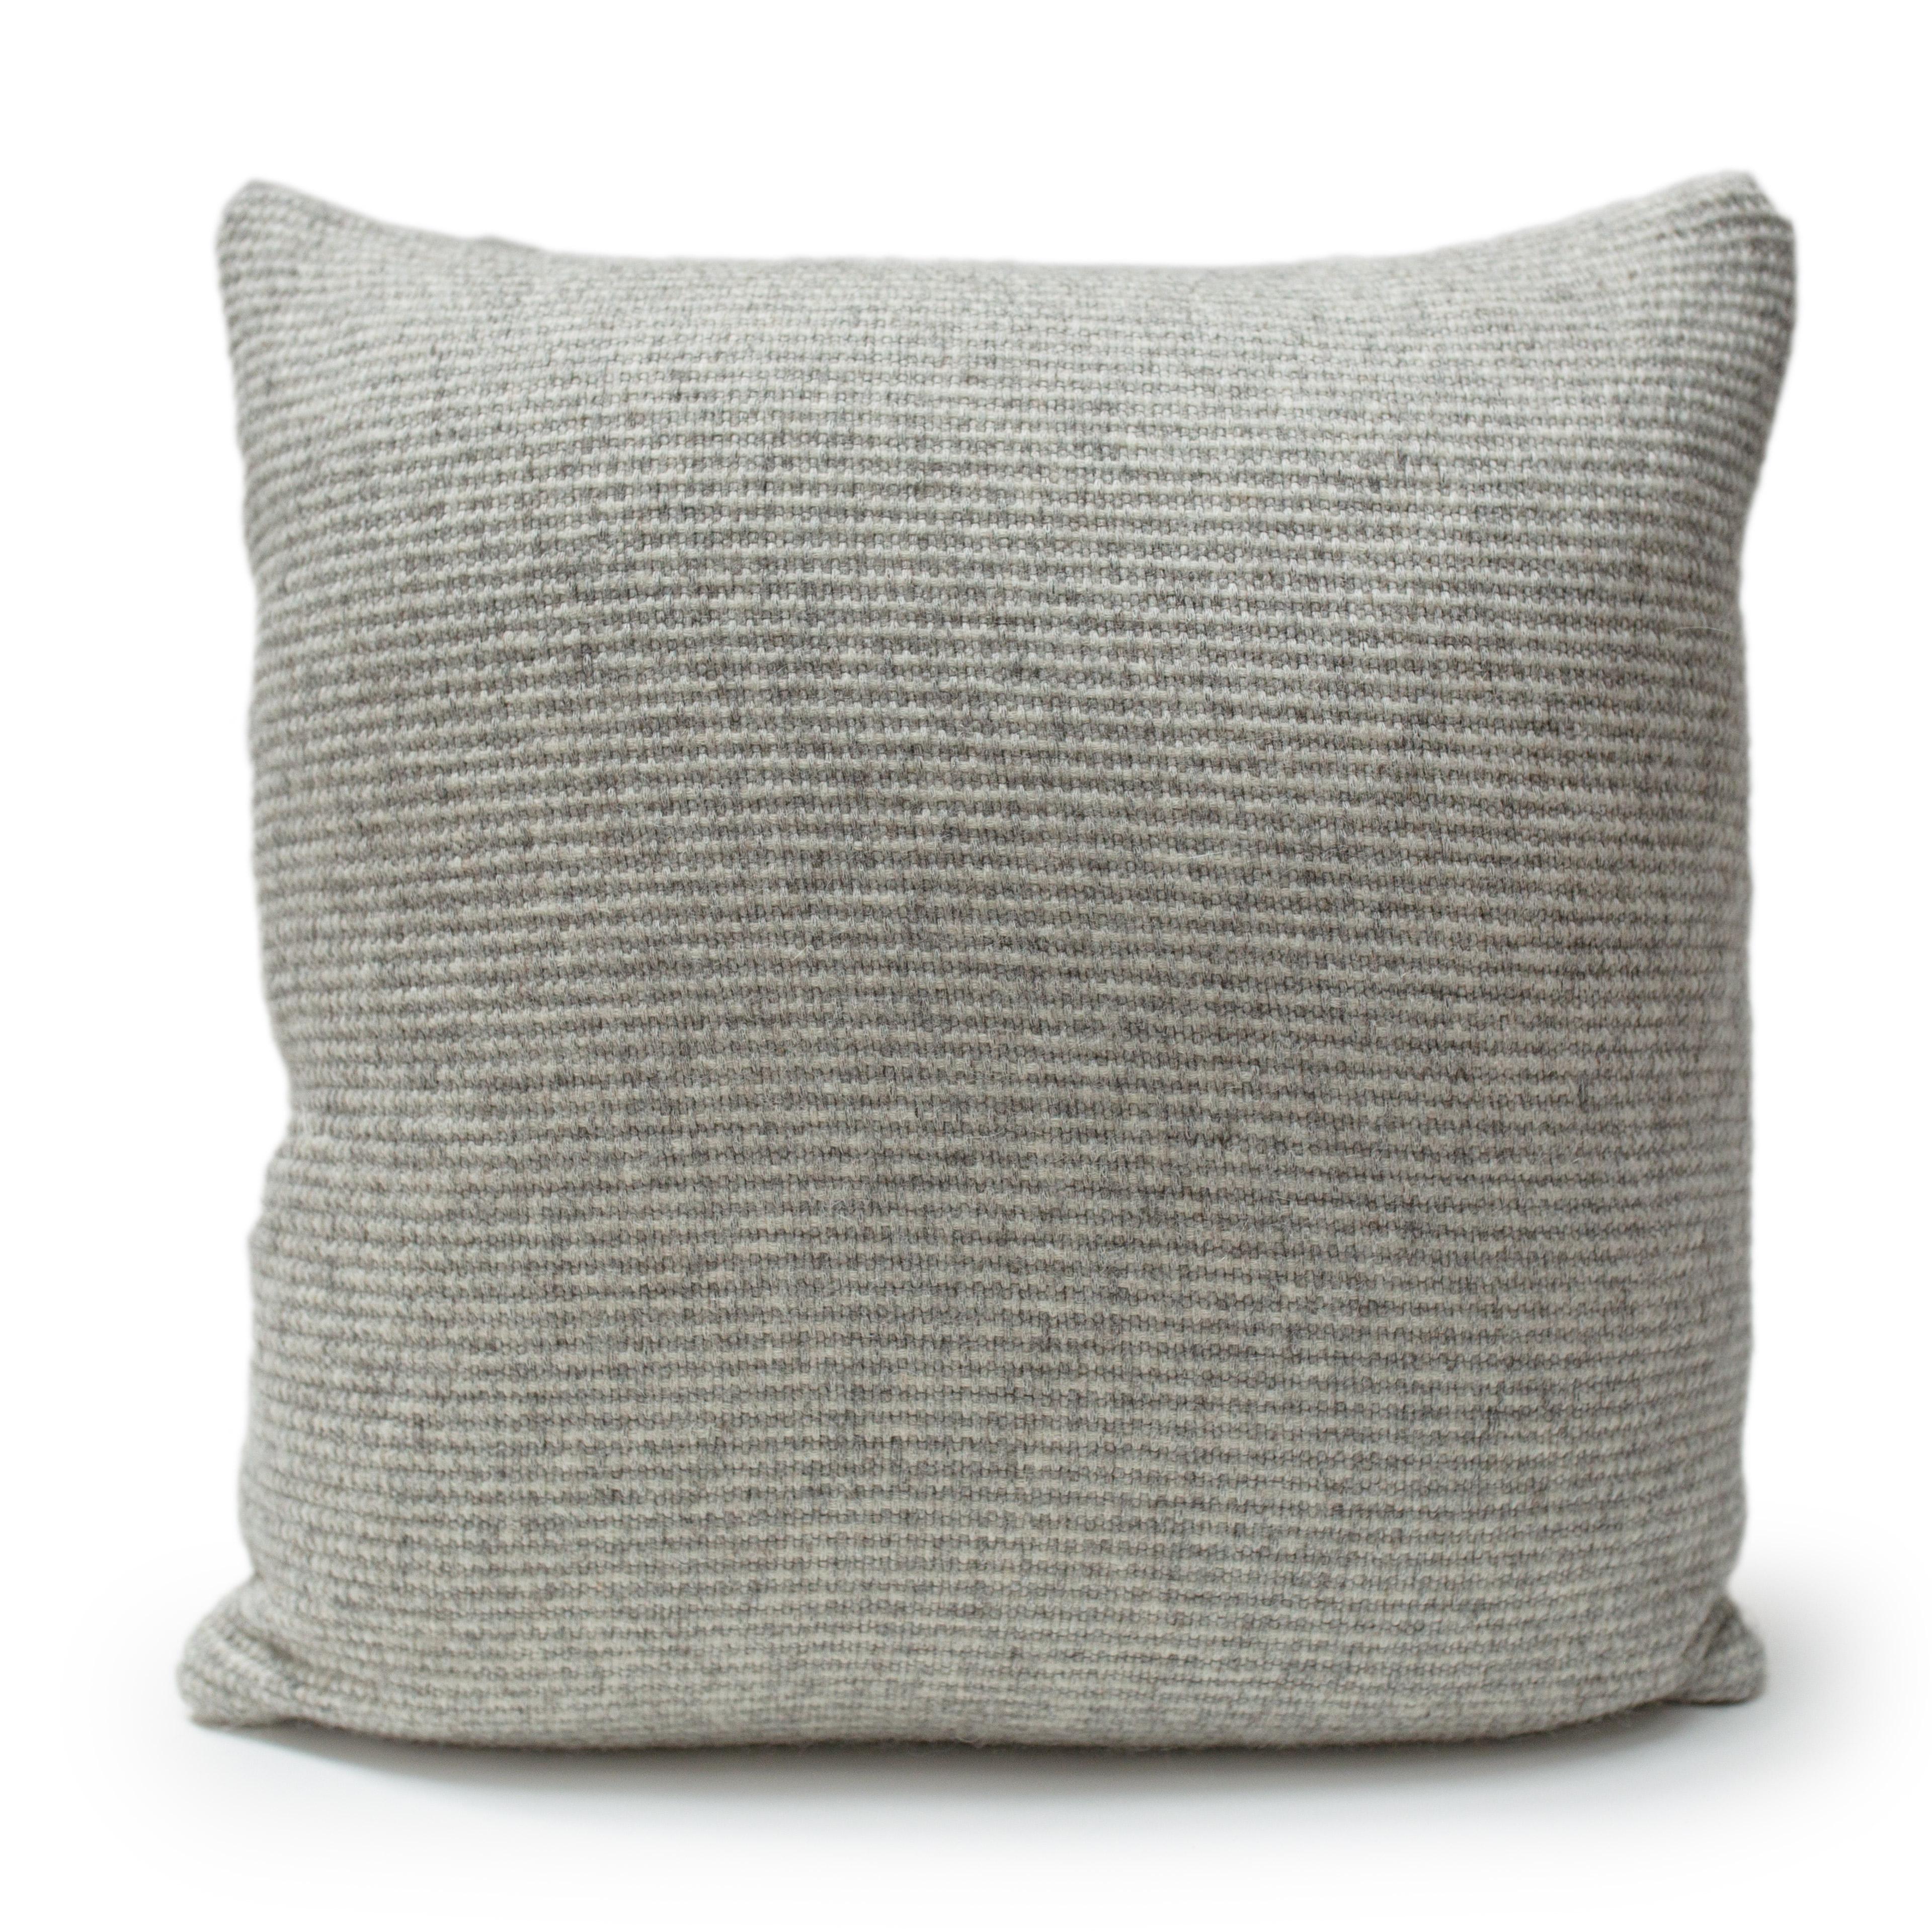 Pillow front in hand-painted, Grey Ribbon felted wool fabric by JG SWITZER, backed with Sandra Jordan Prima Alpaca fabric in Casa Pebble.

Pillow comes with a hidden zipper enclosure and ships with a high quality, custom insert. This is Dry Clean